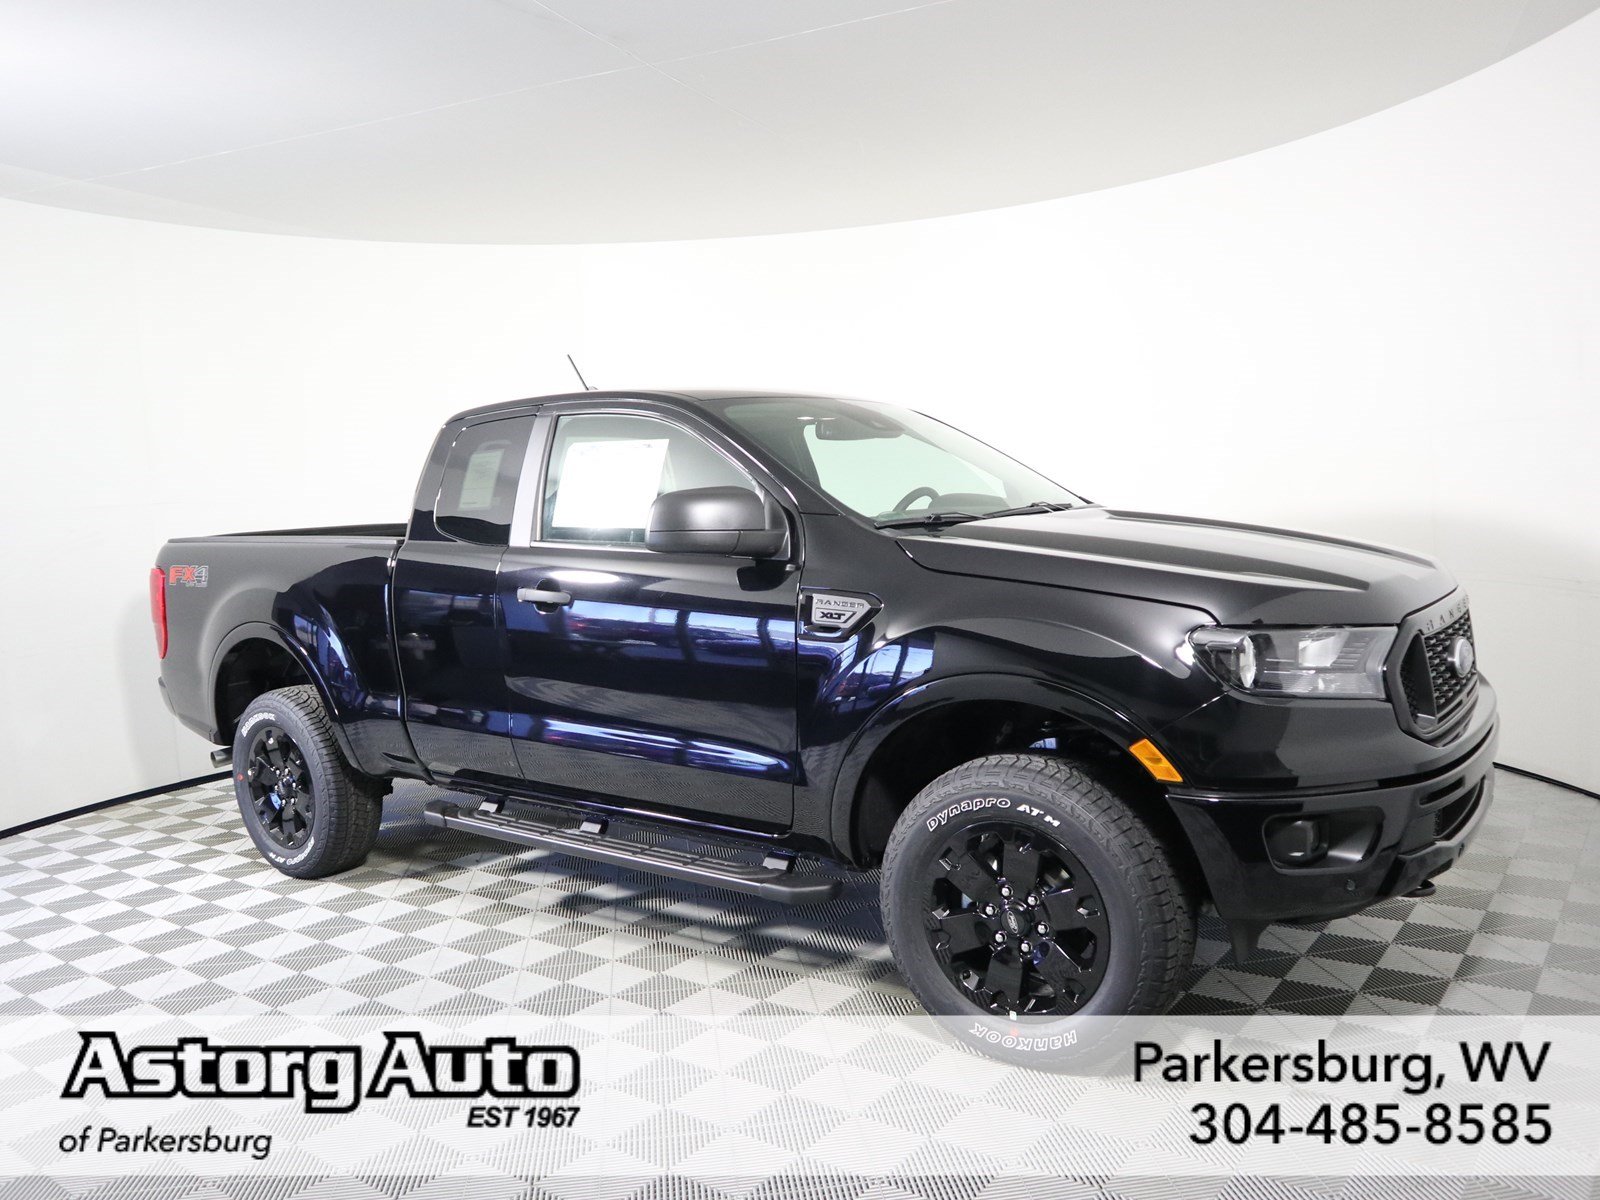 New 2019 Ford Ranger Xlt With Navigation 4wd